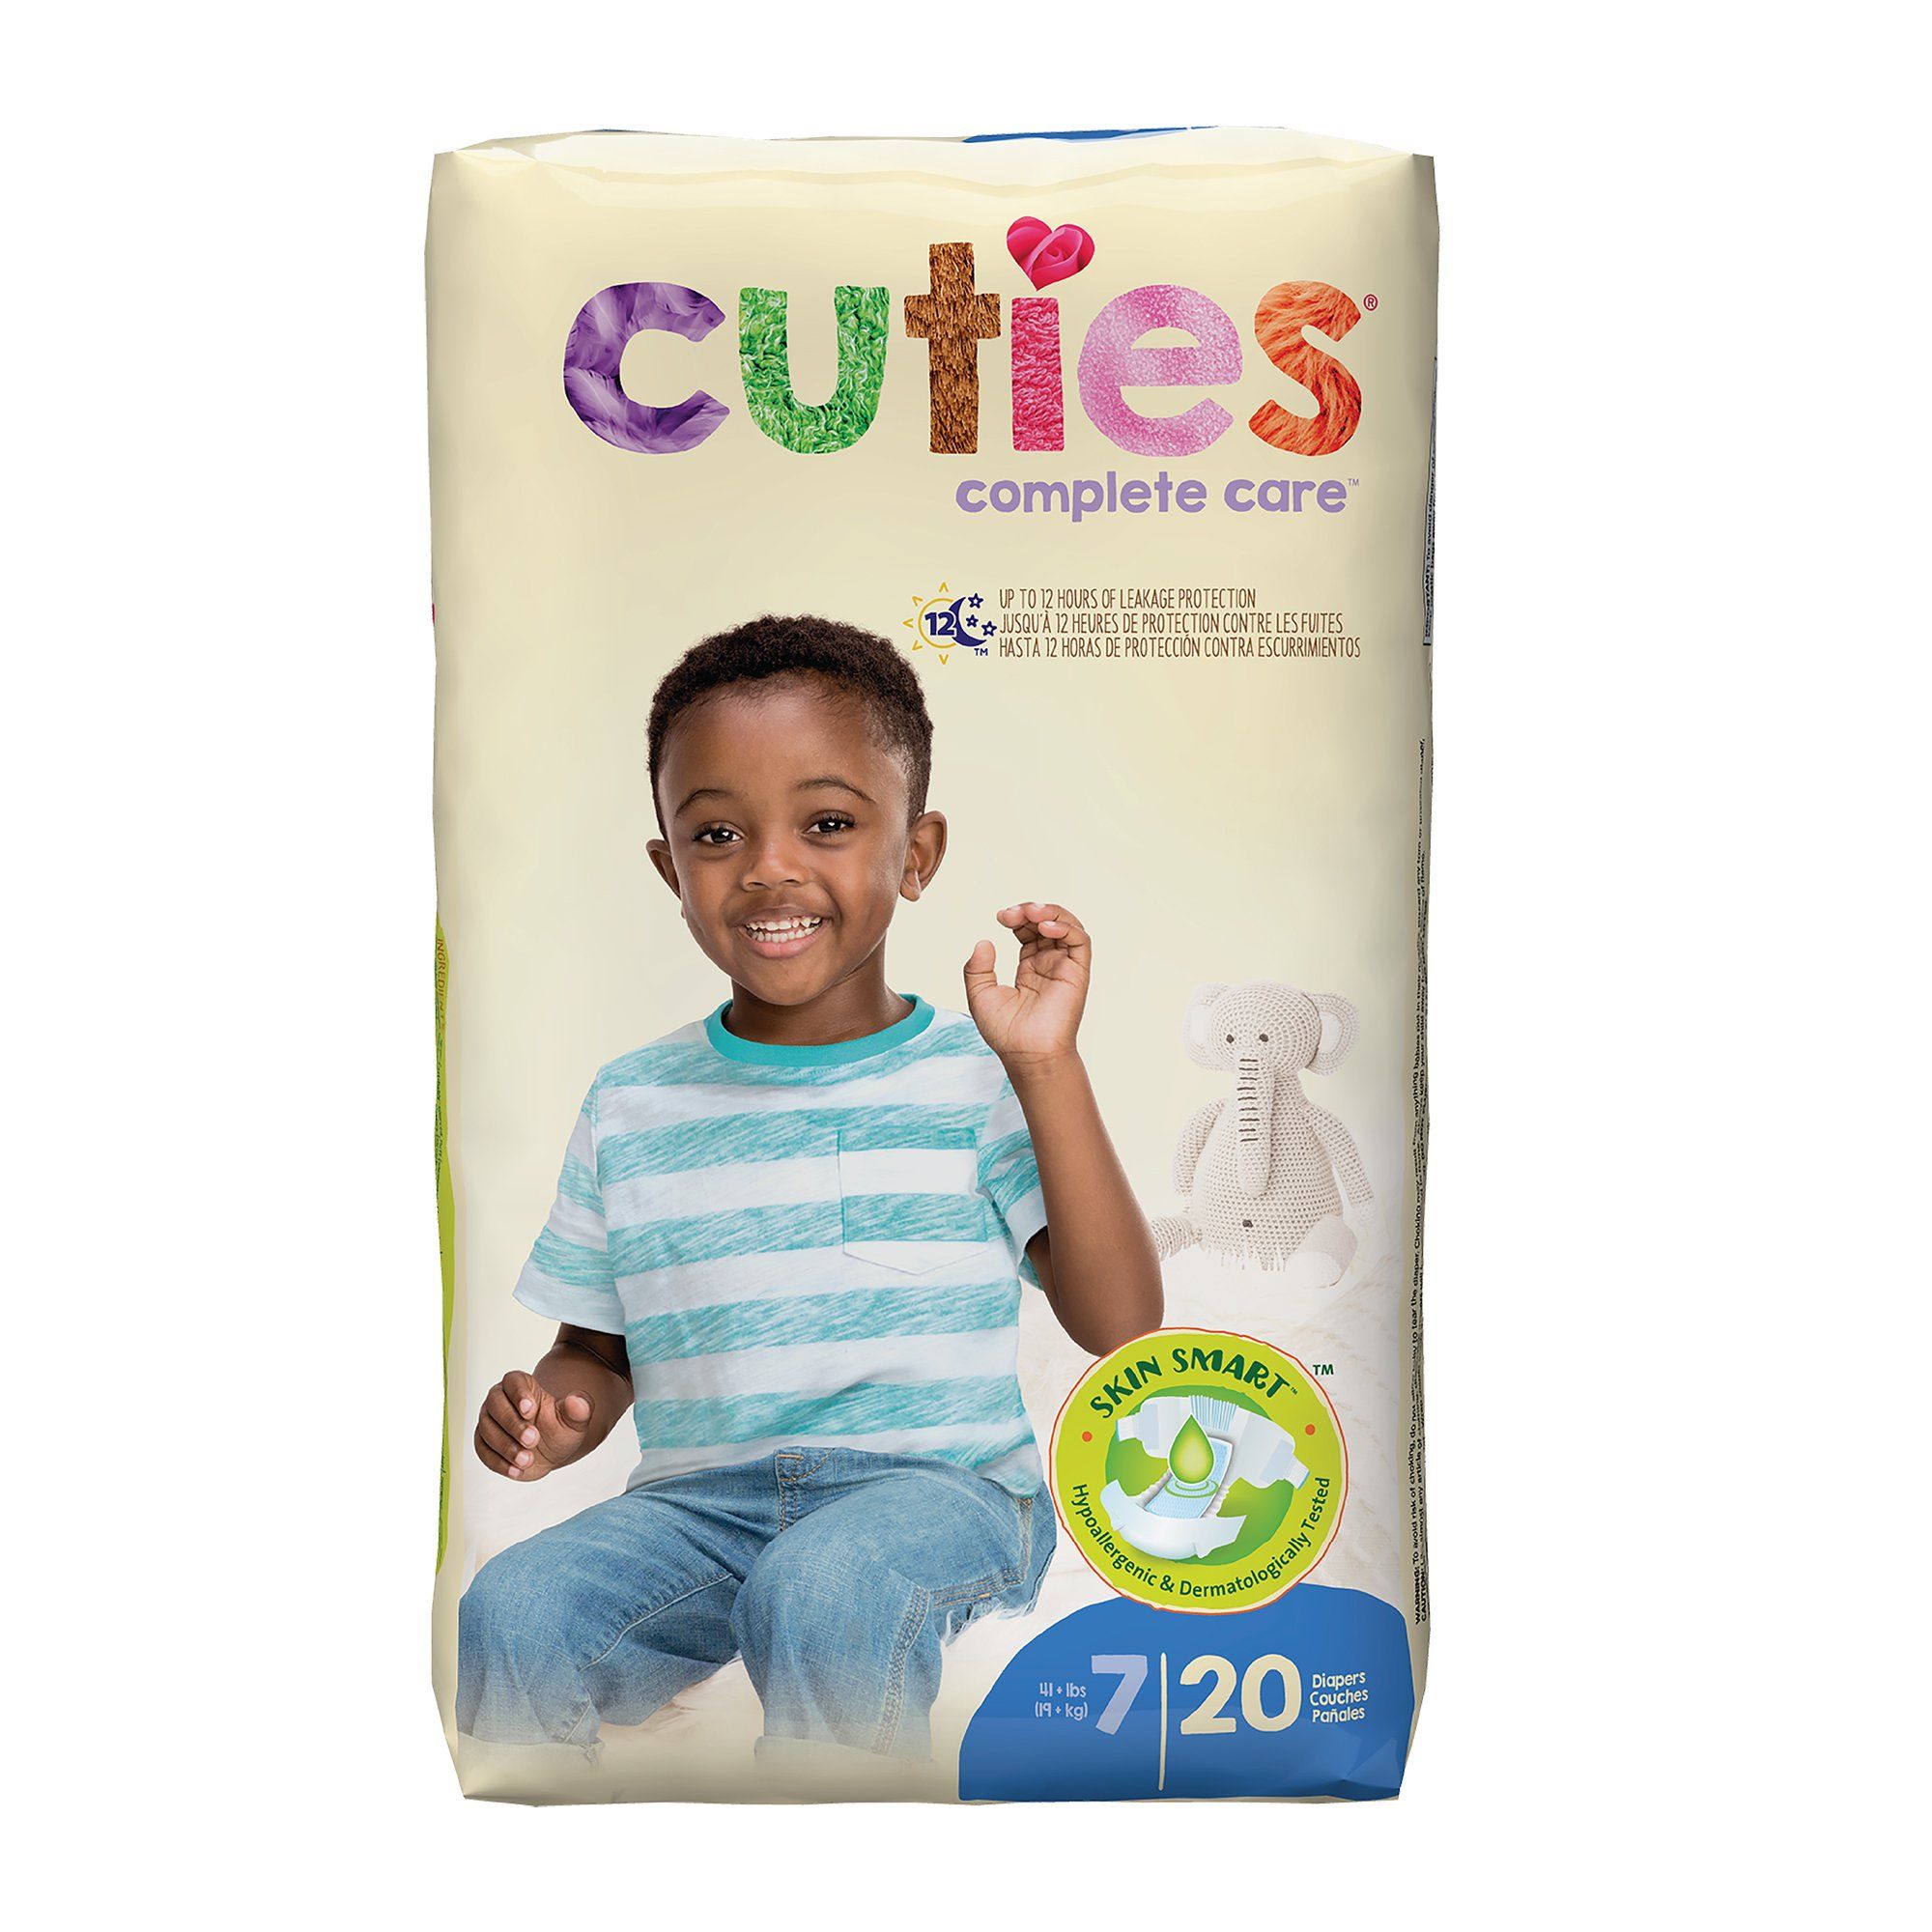 Cuties Complete Care Baby Diapers,  Size 7 - 20 ct